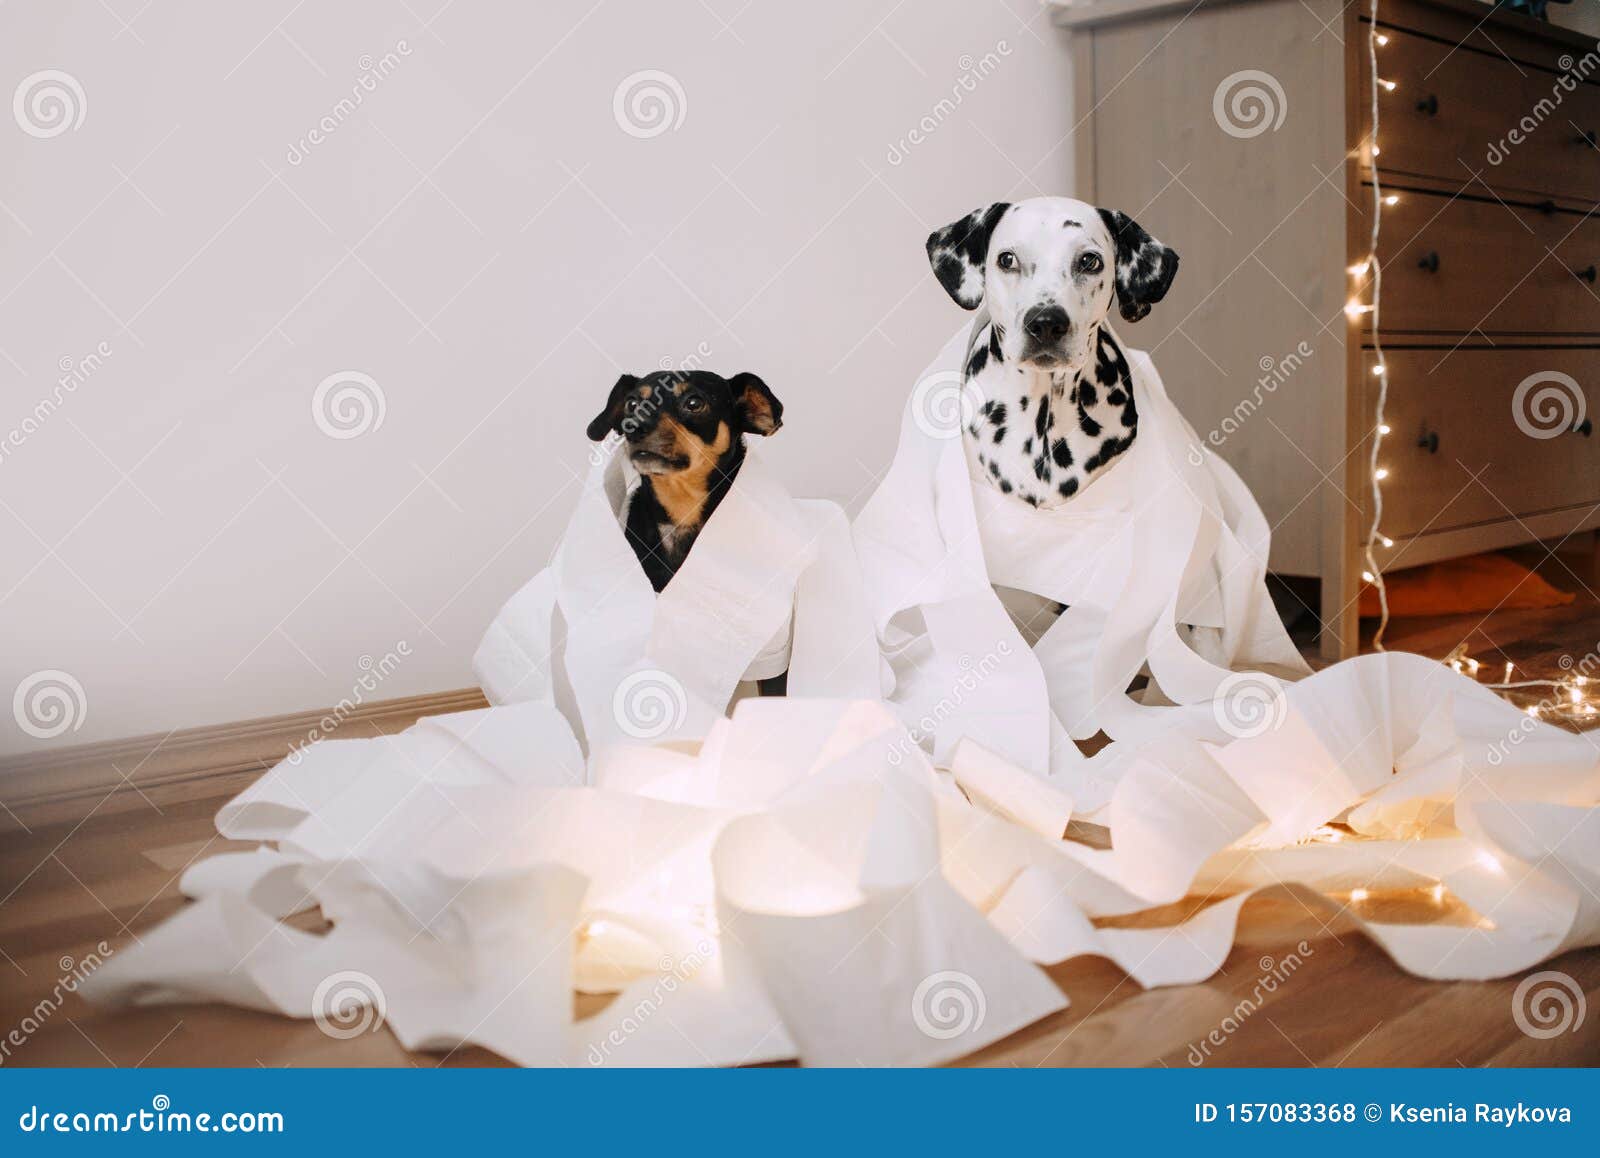 two dogs made a mess of paper